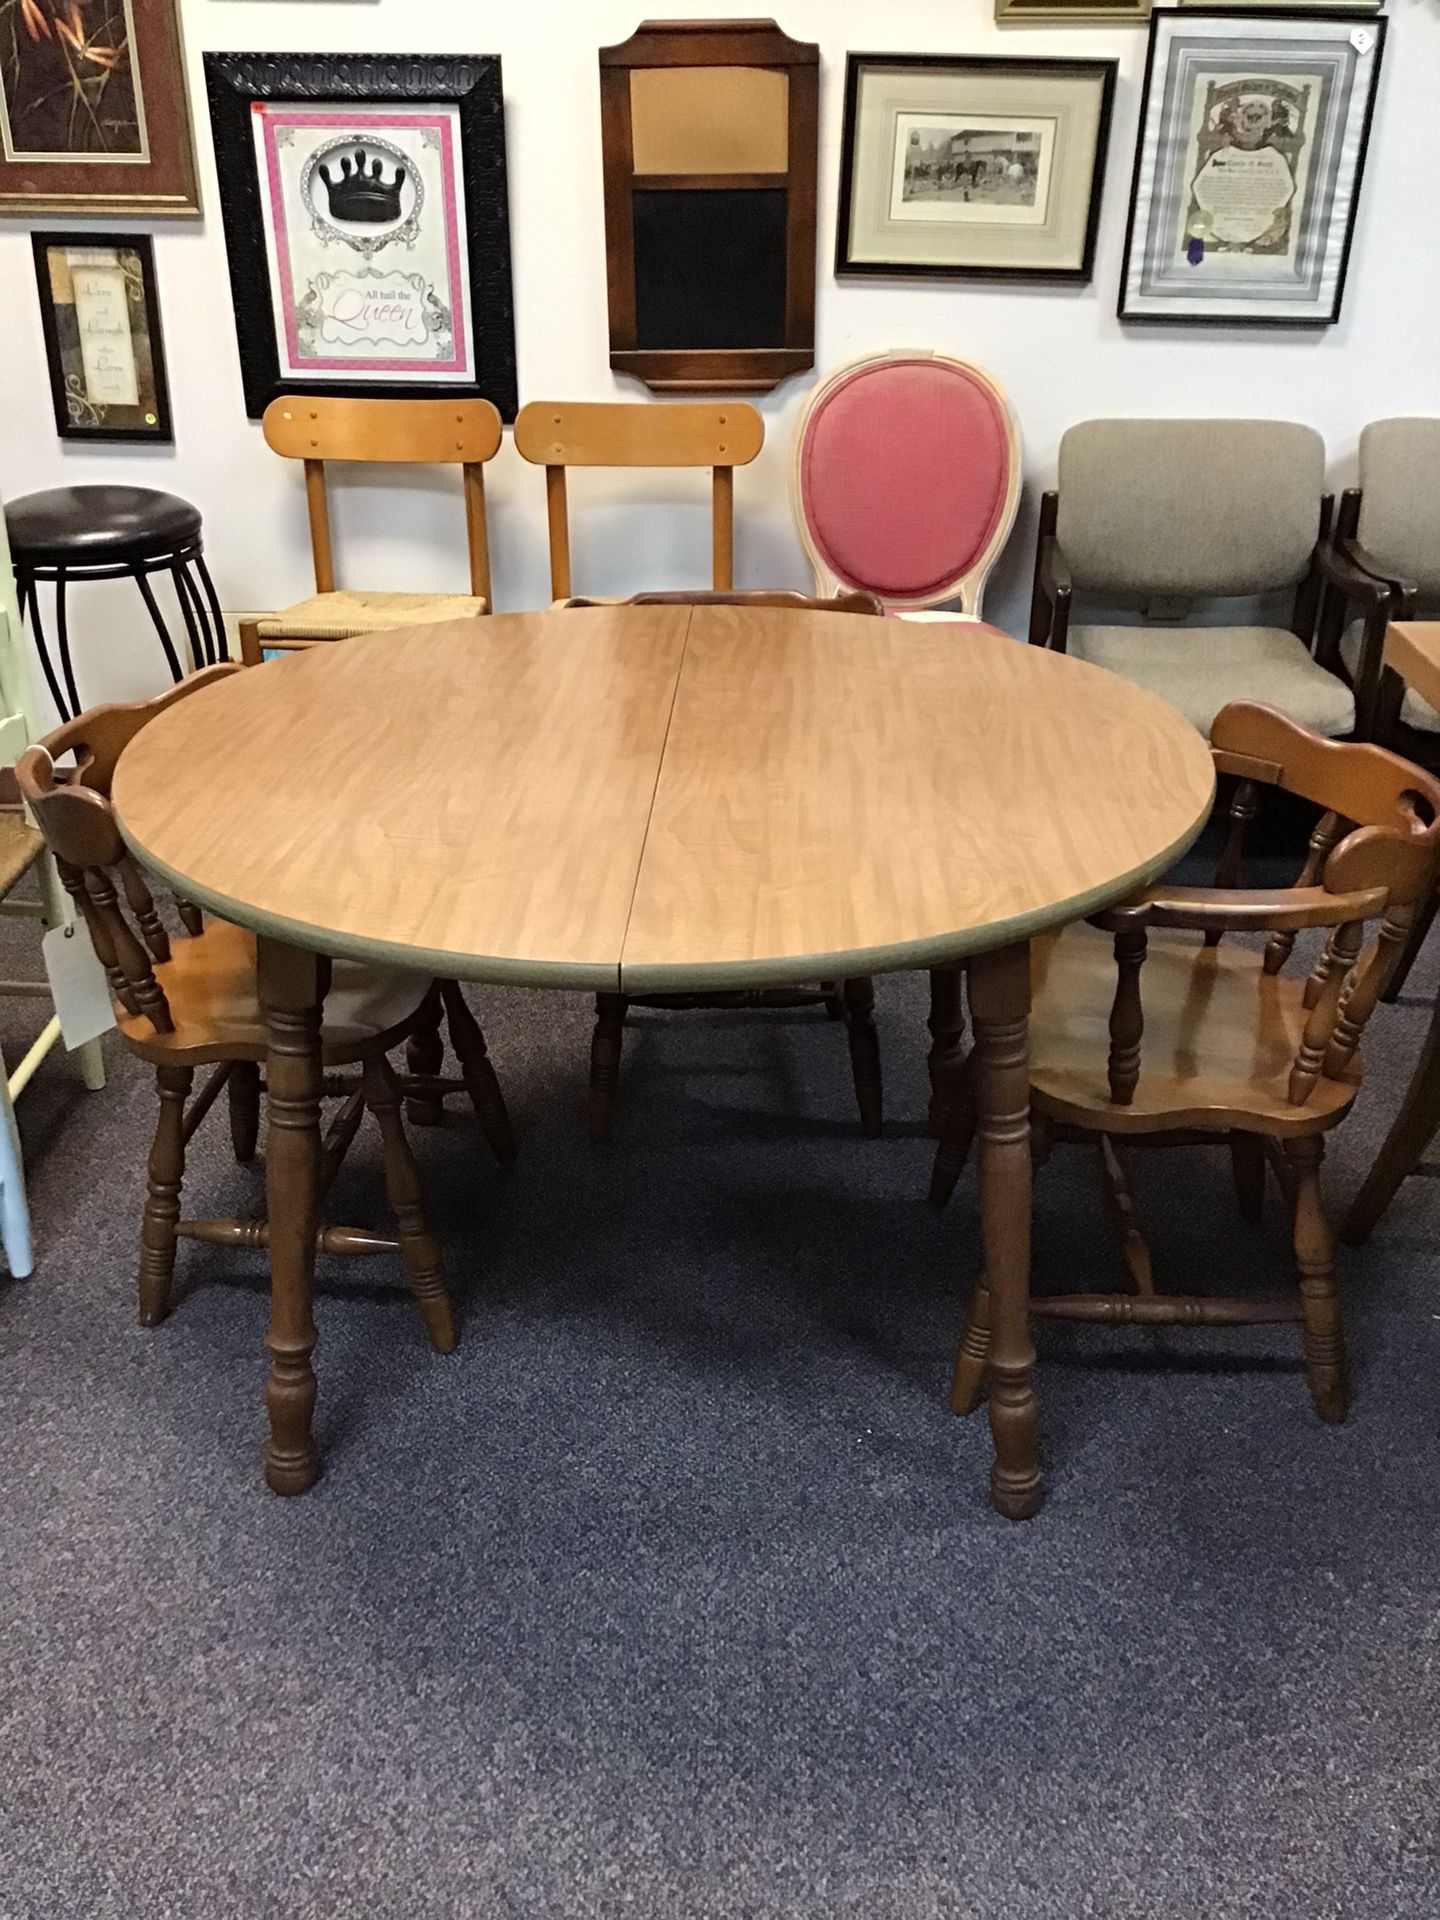 Table with three chairs